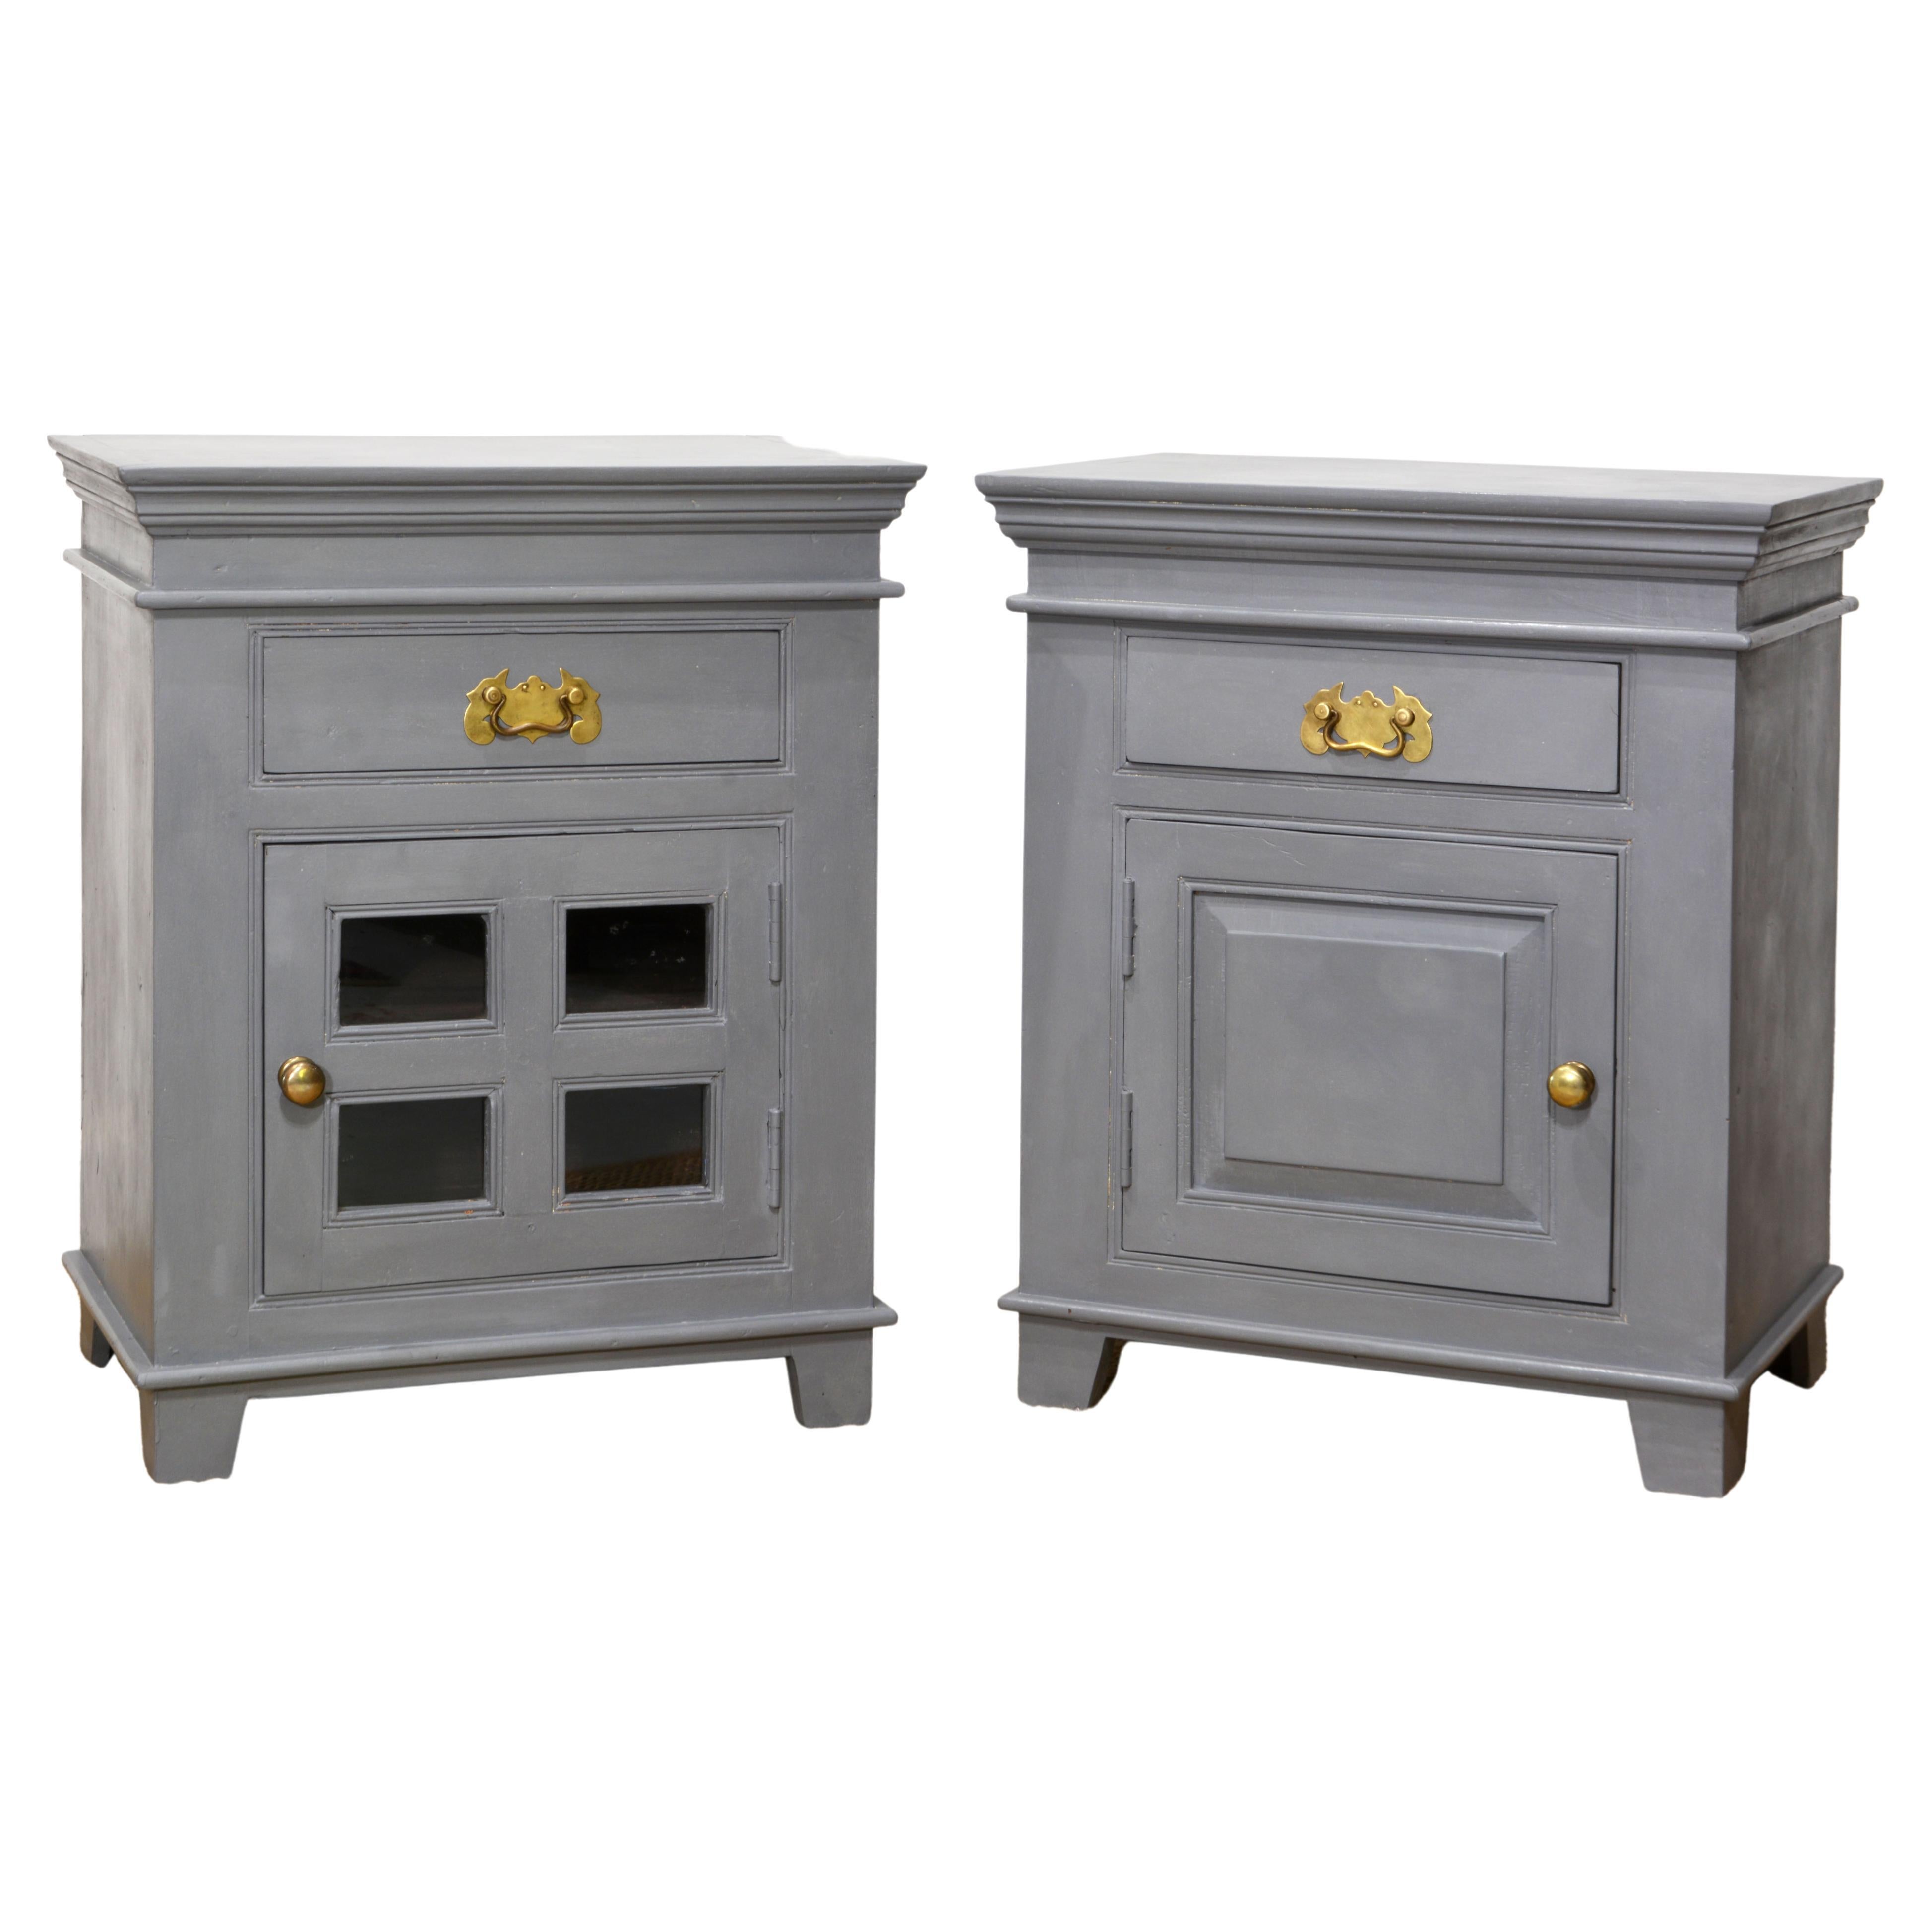 Two Anglo-Indian British Colonial Style Painted Hardwood Bedside Cabinets, 1950s For Sale